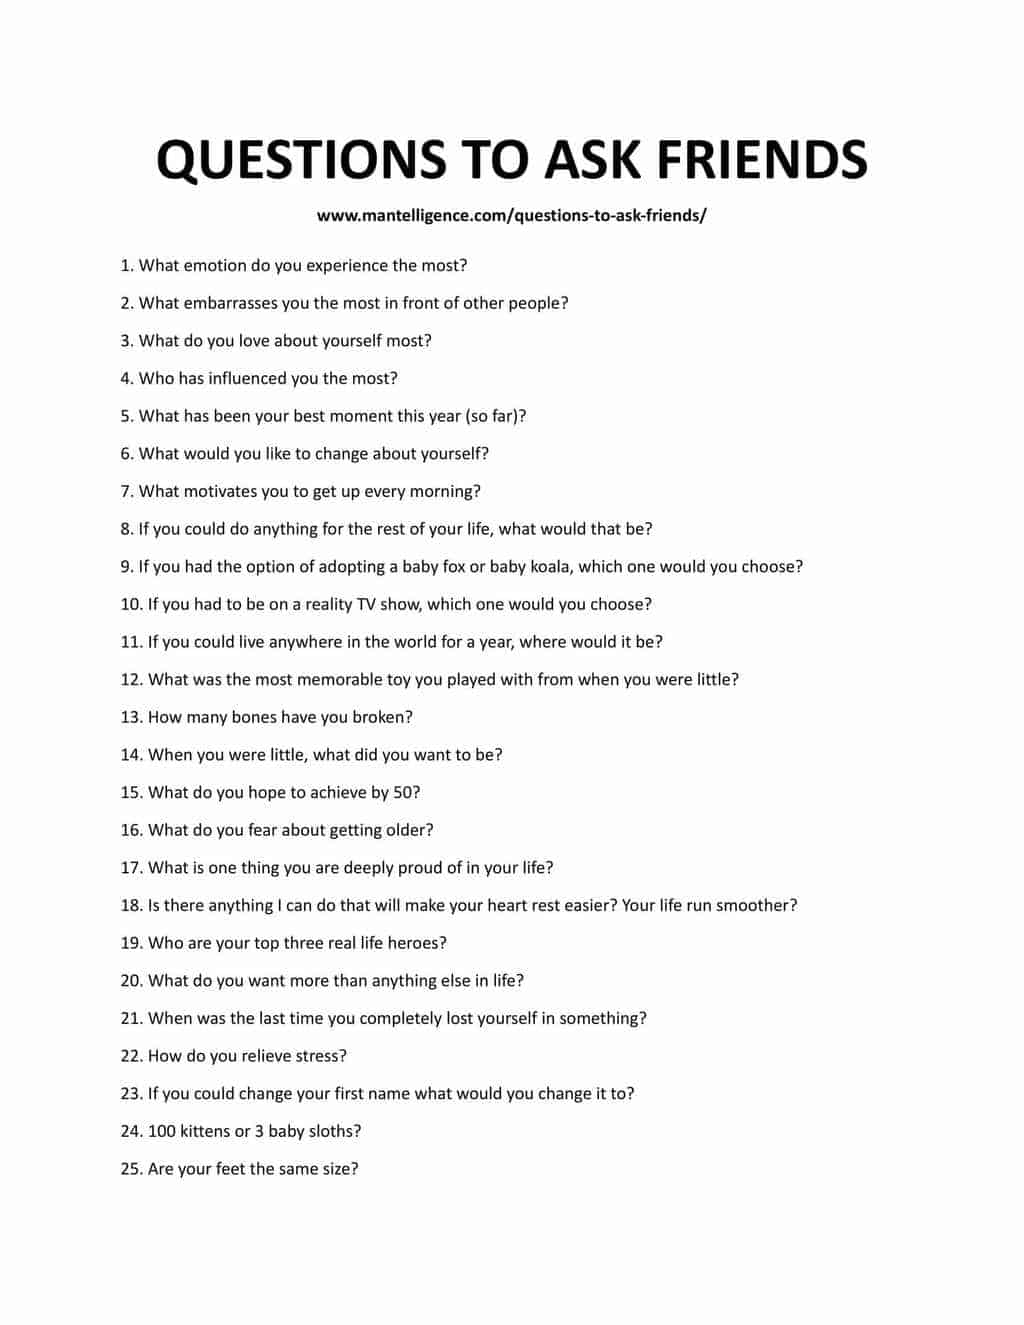 QUESTIONS TO ASK FRIENDS 1 